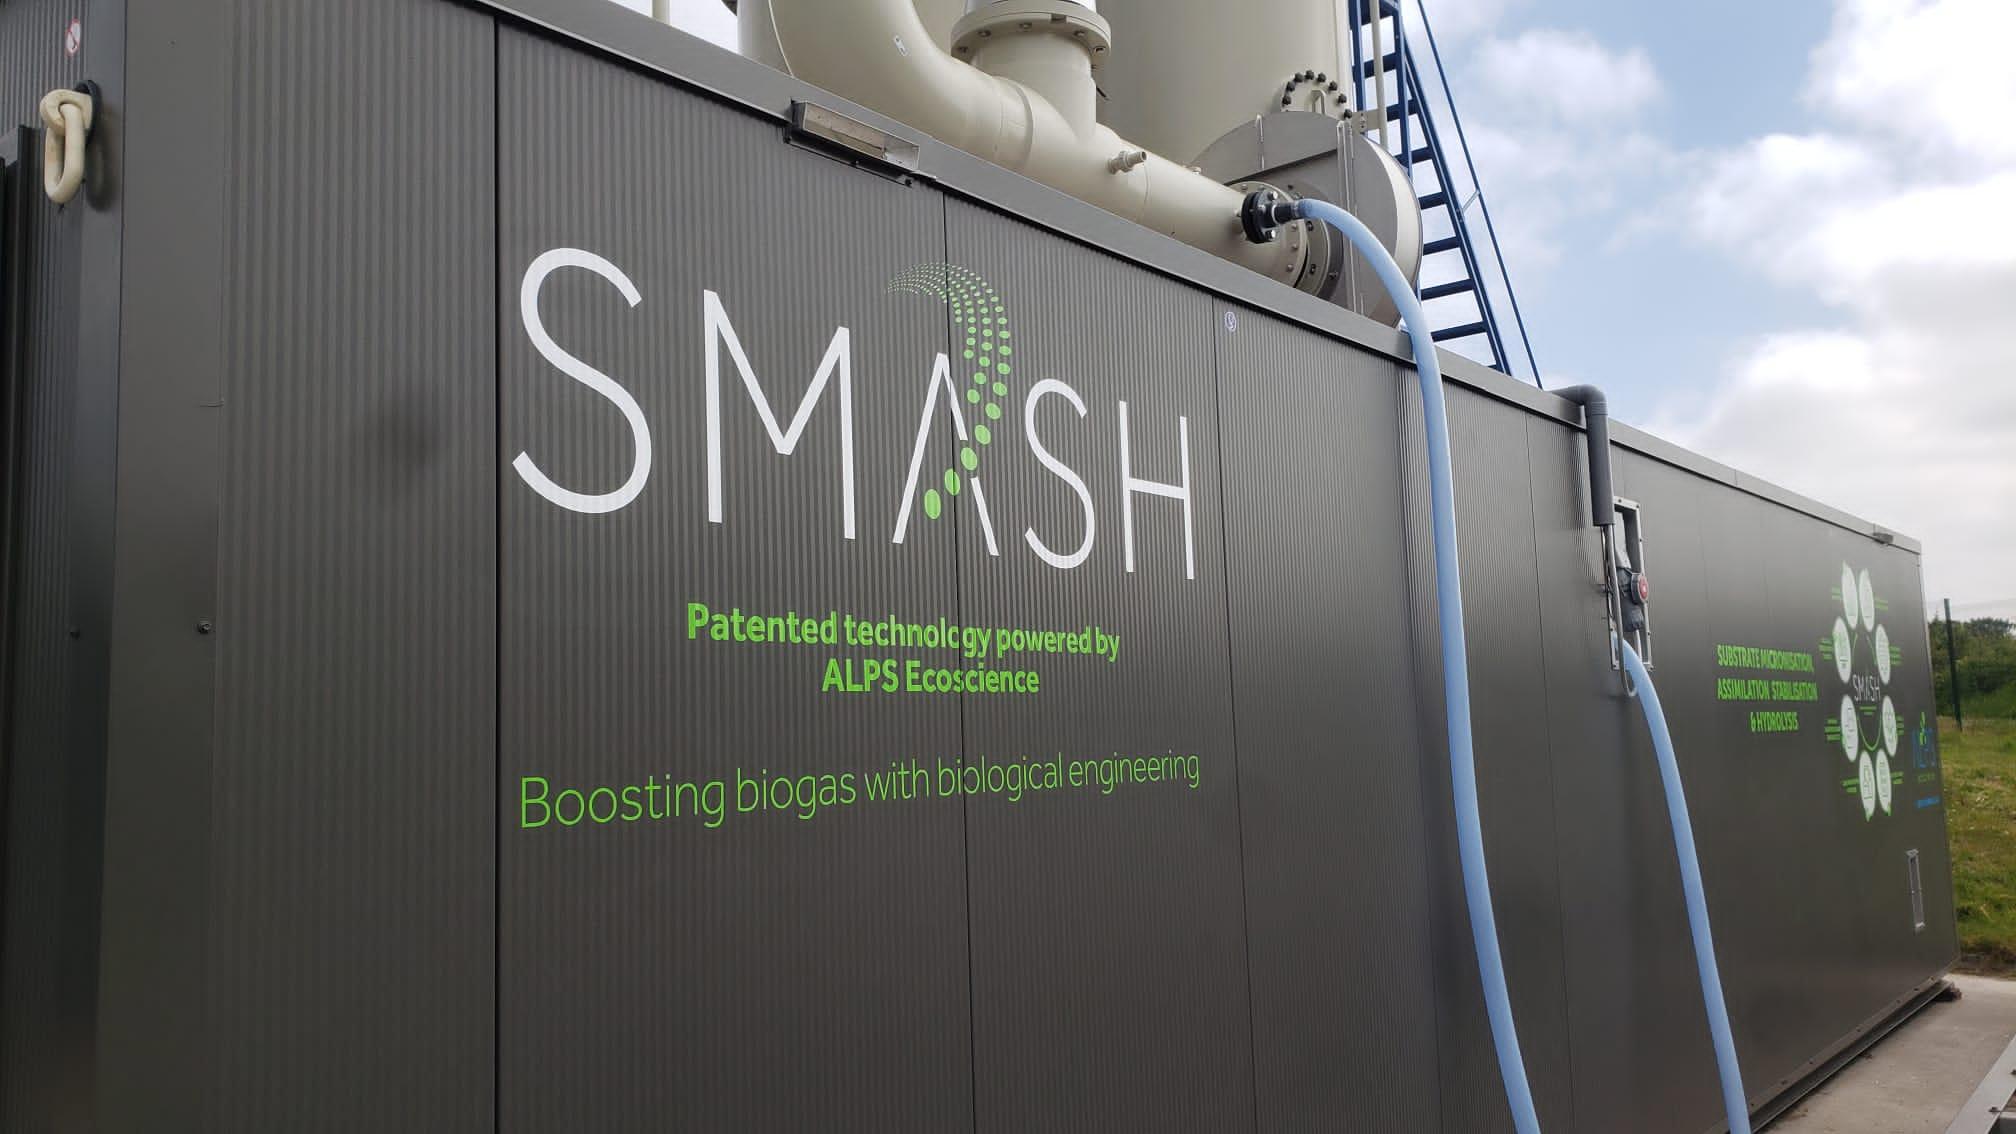 Product Biogas new technology is coming: Revolutionising Renewable Energy - Alps Ecoscience image